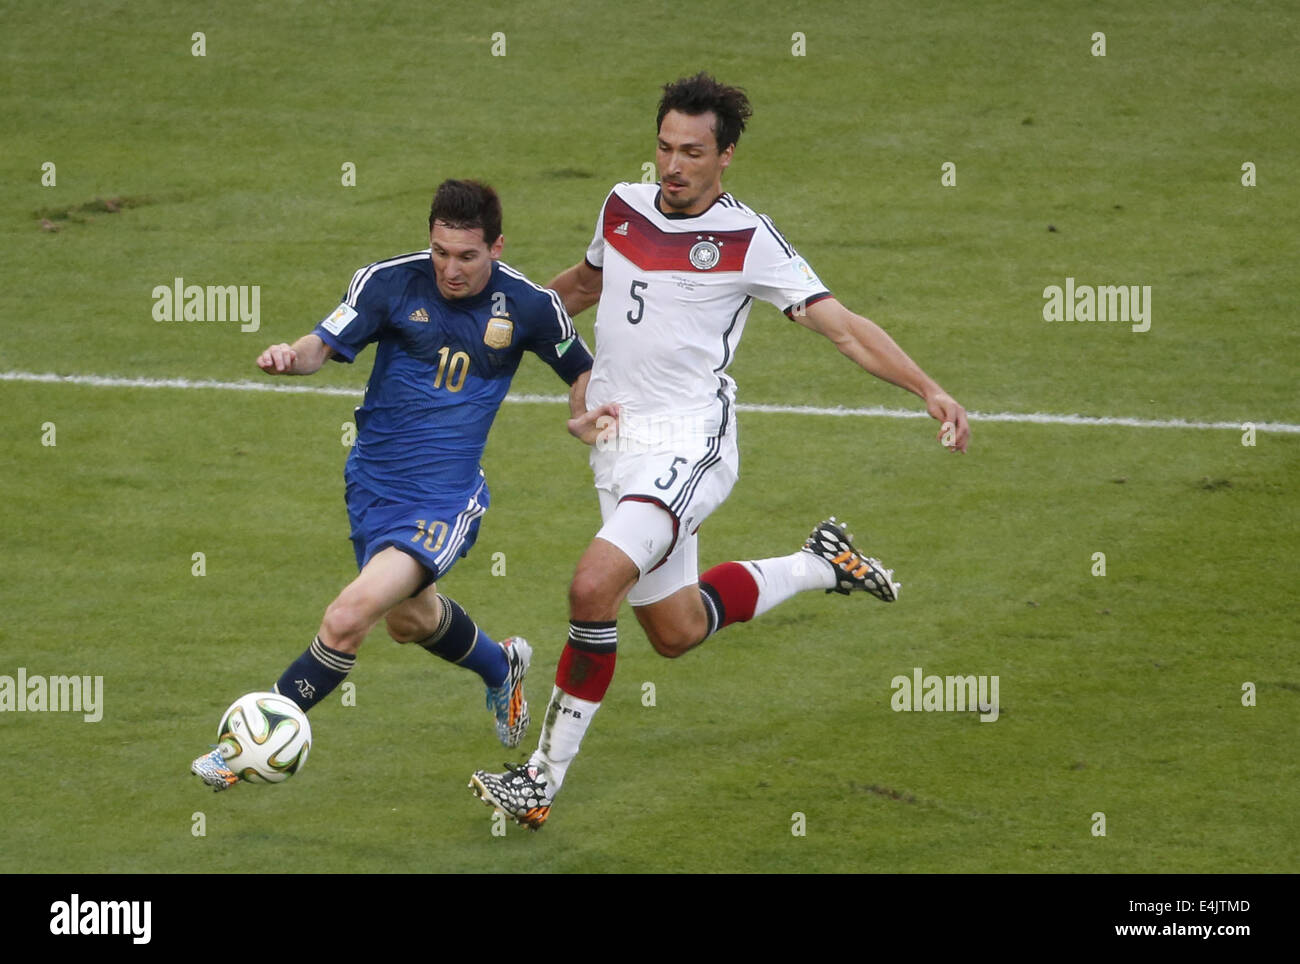 Rio De Janeiro, Brazil. 13th July, 2014. Germany's Mats Hummels vies with Argentina's Lionel Messi during the final match between Germany and Argentina of 2014 FIFA World Cup at the Estadio do Maracana Stadium in Rio de Janeiro, Brazil, on July 13, 2014. Credit:  Liao Yujie/Xinhua/Alamy Live News Stock Photo